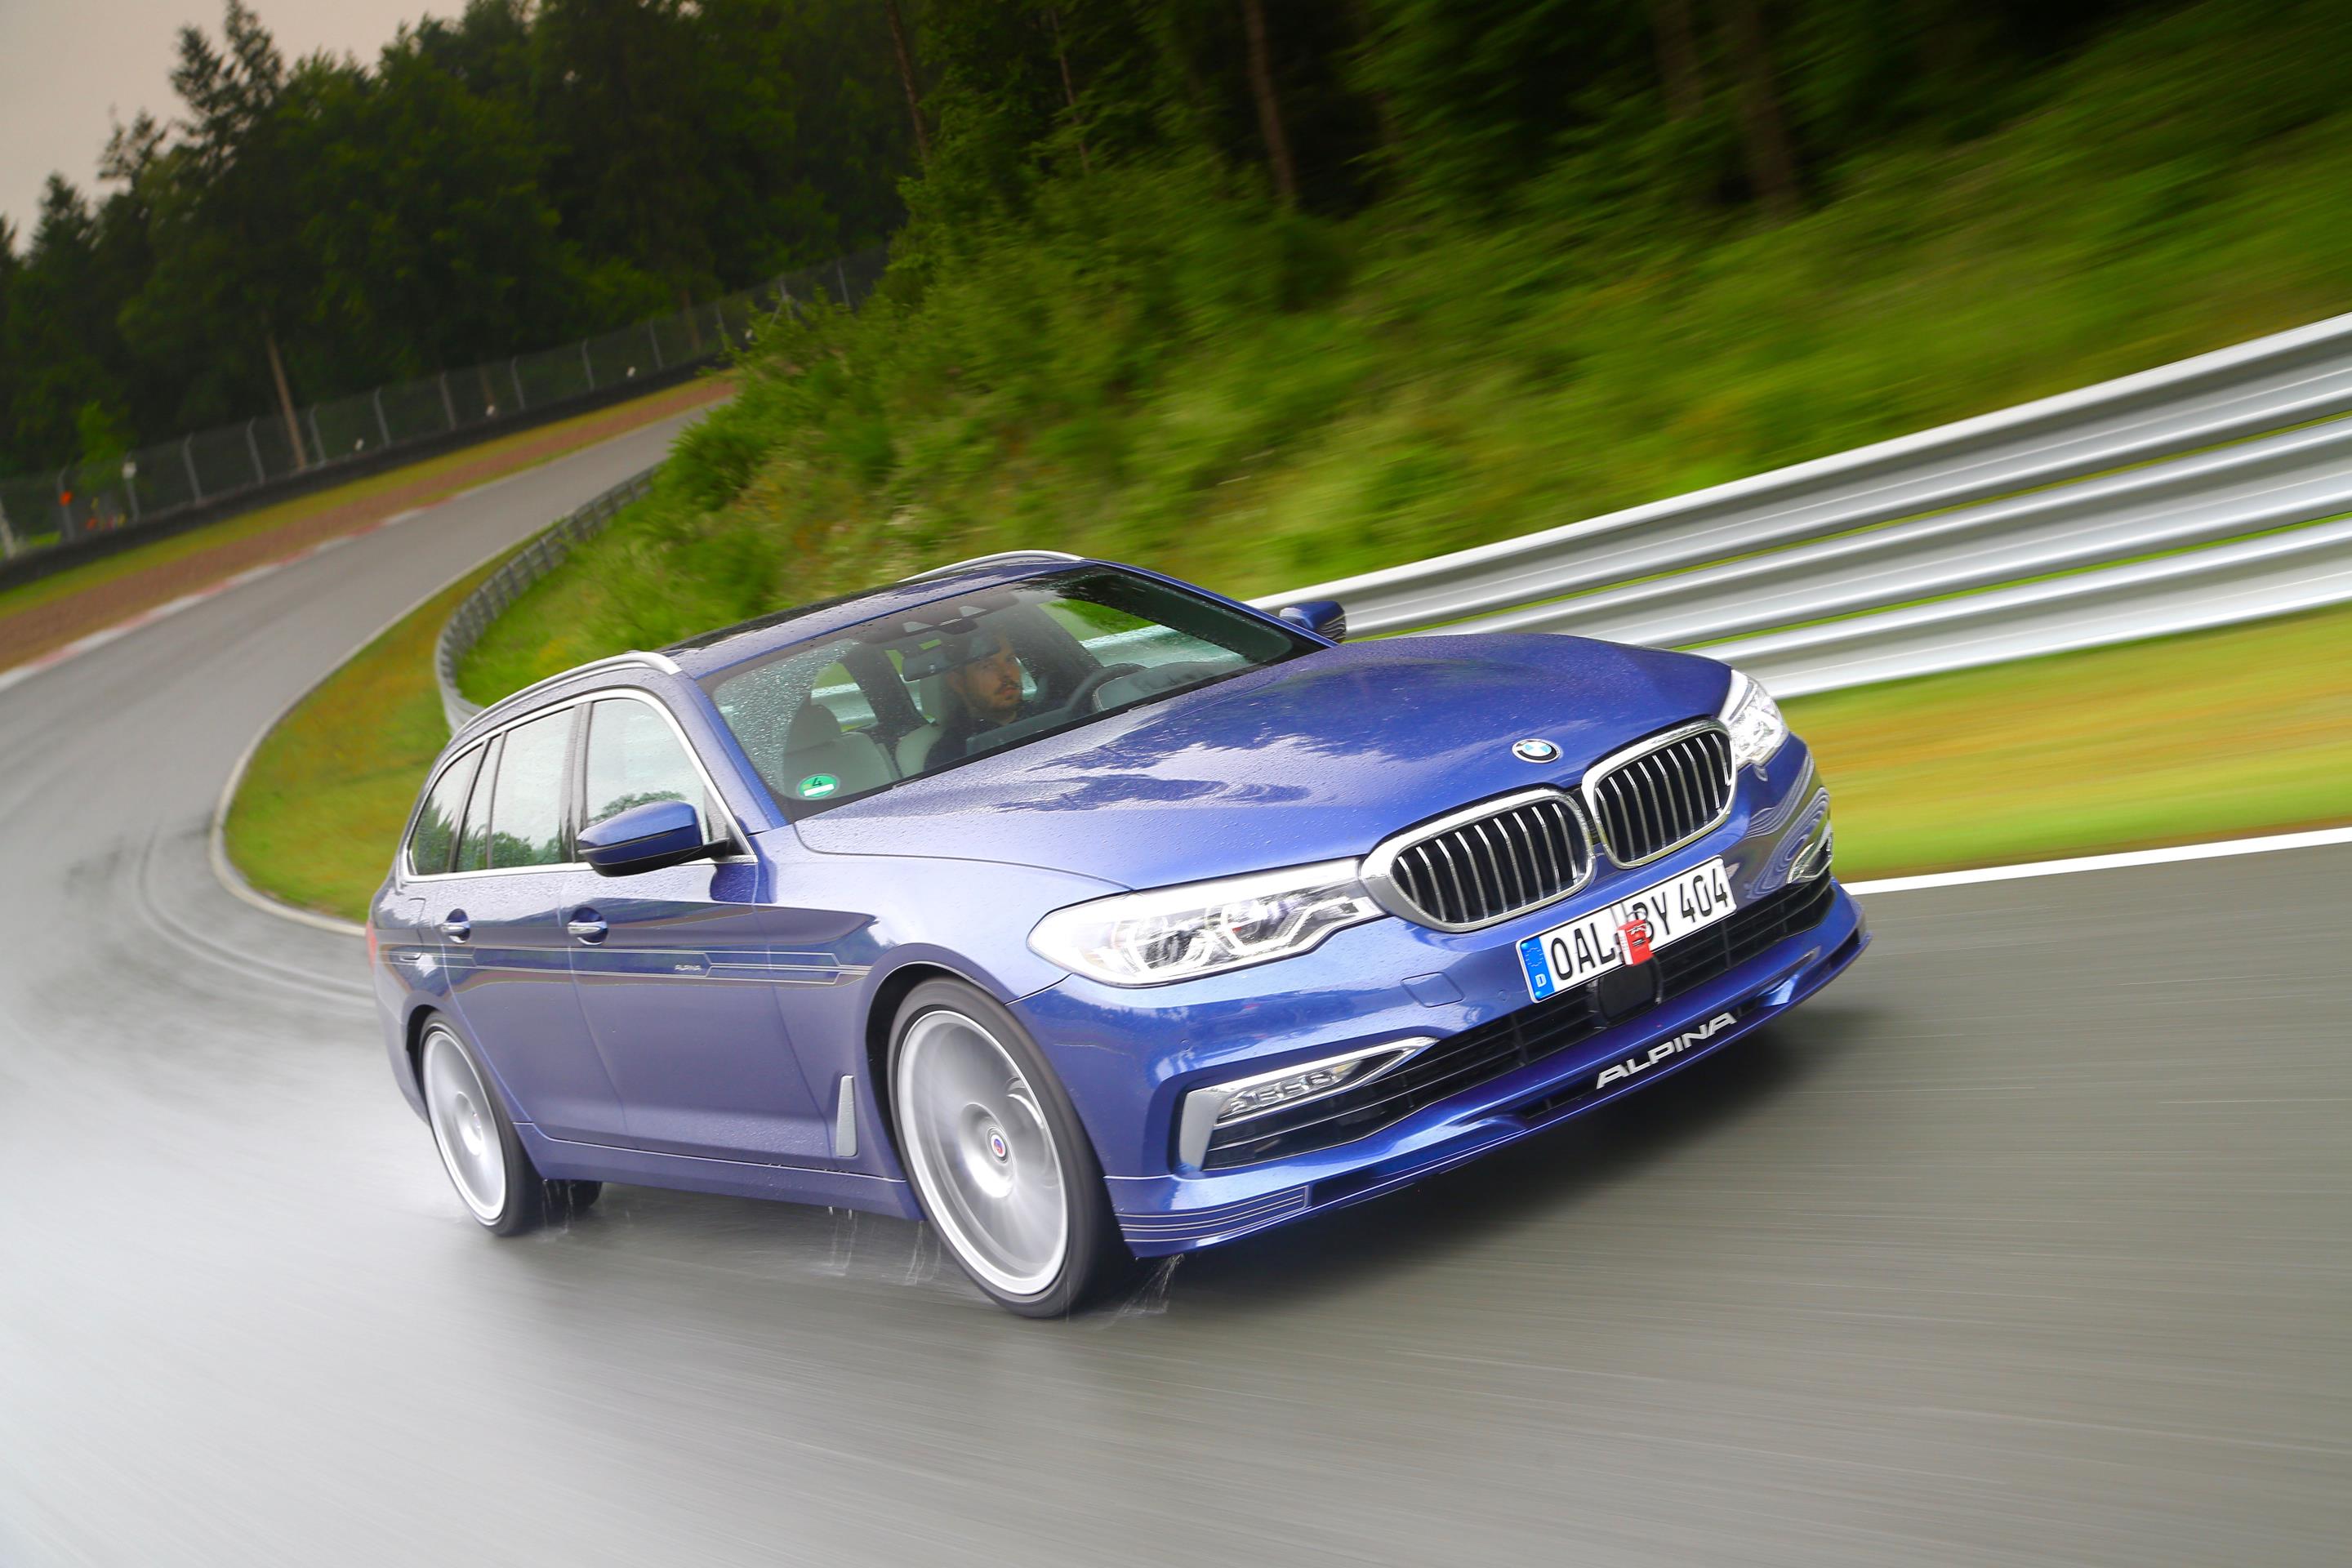 2018 Alpina B5 BITURBO ESTATE review by Jeremy Clarkson for Sunday Times Driving